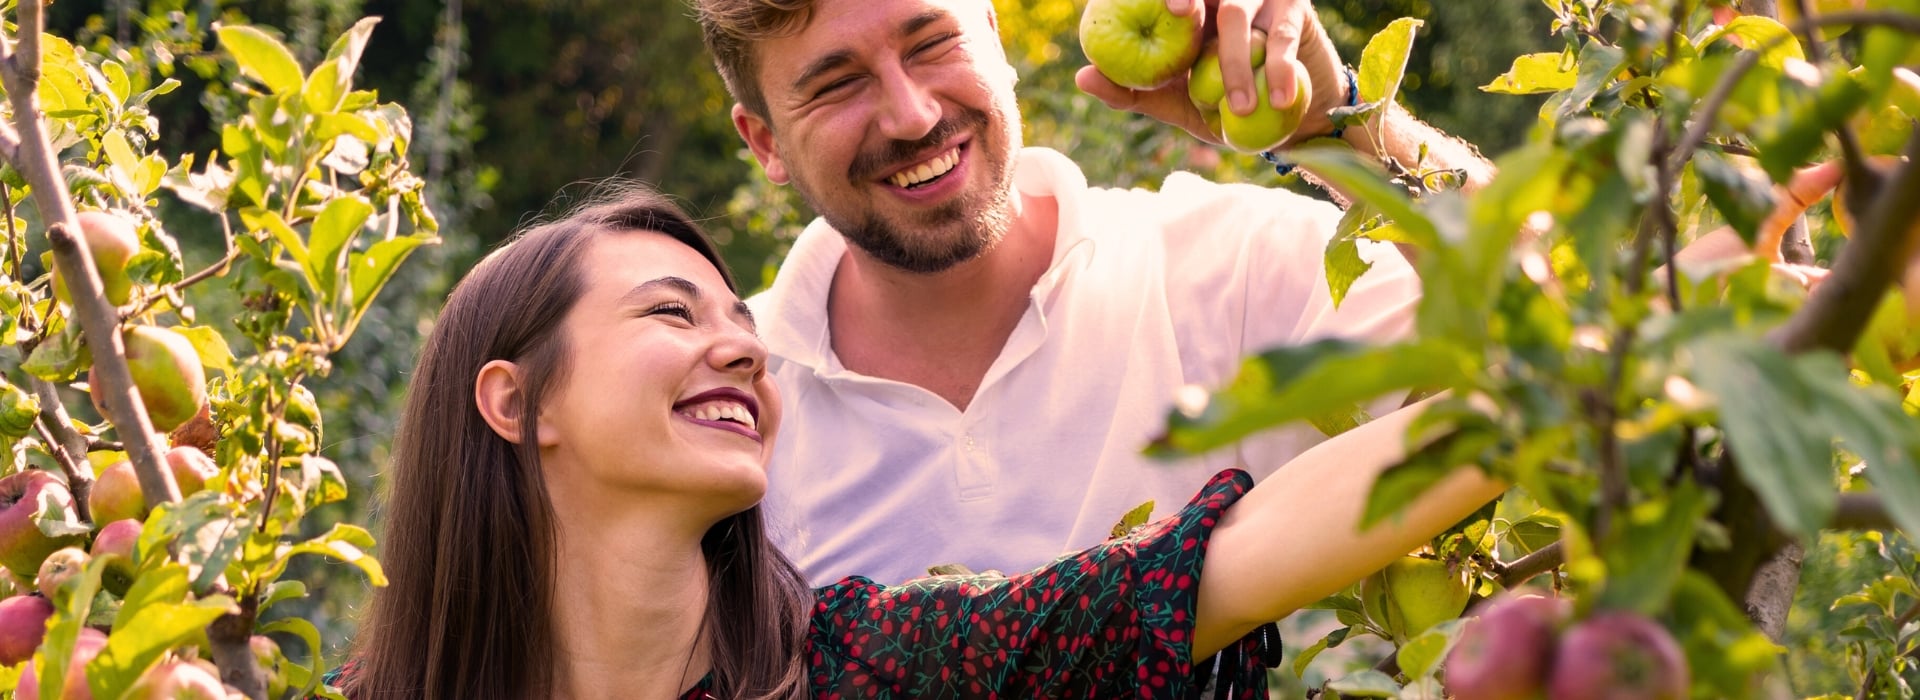 Happy couple smiling while picking apples at an orchard